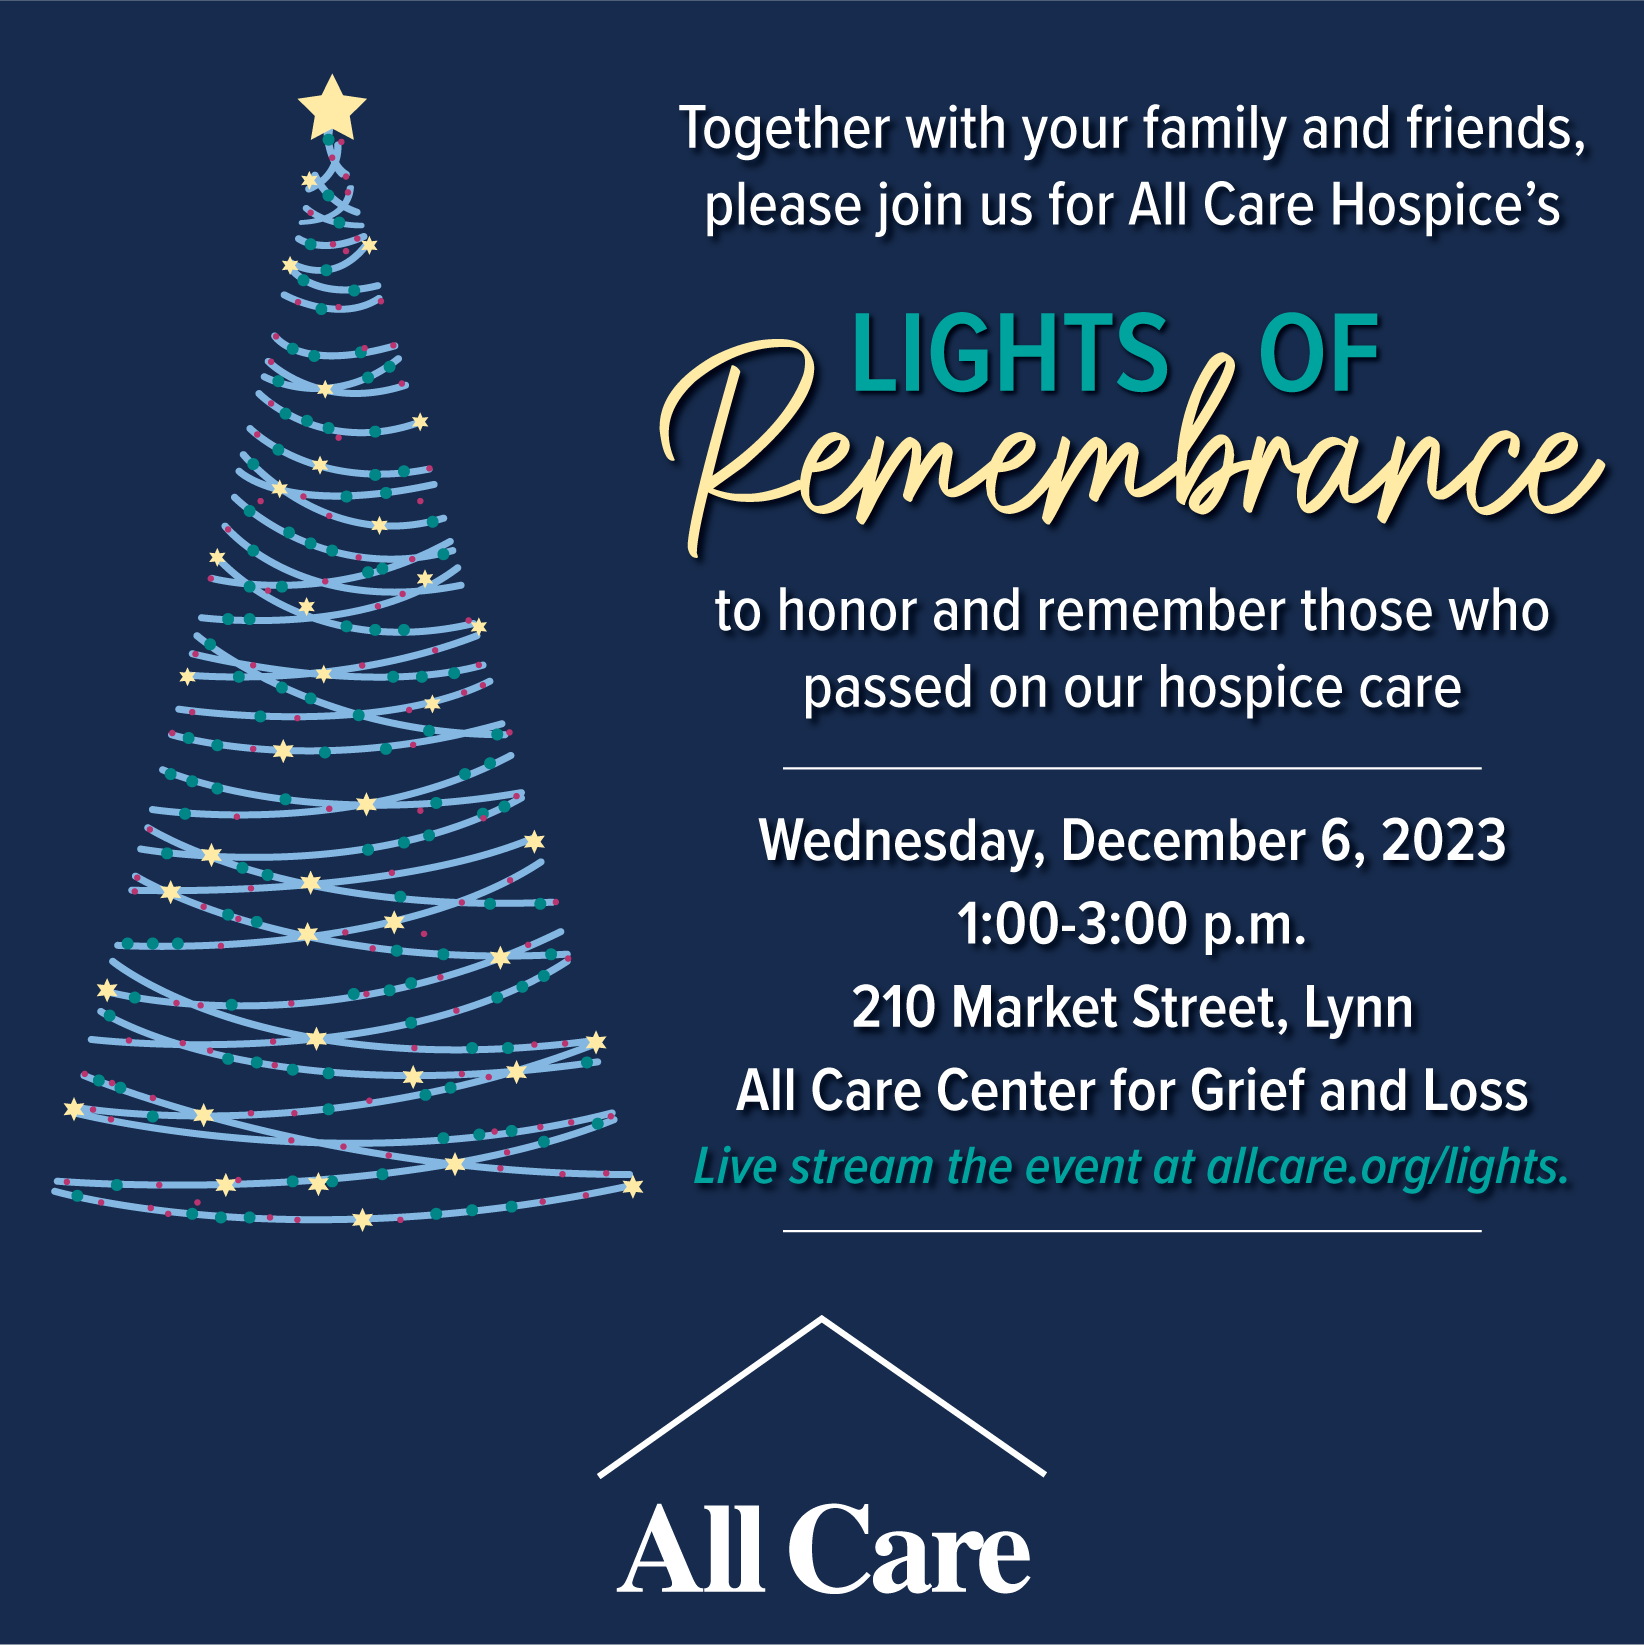 2023 Lights of Remembrance